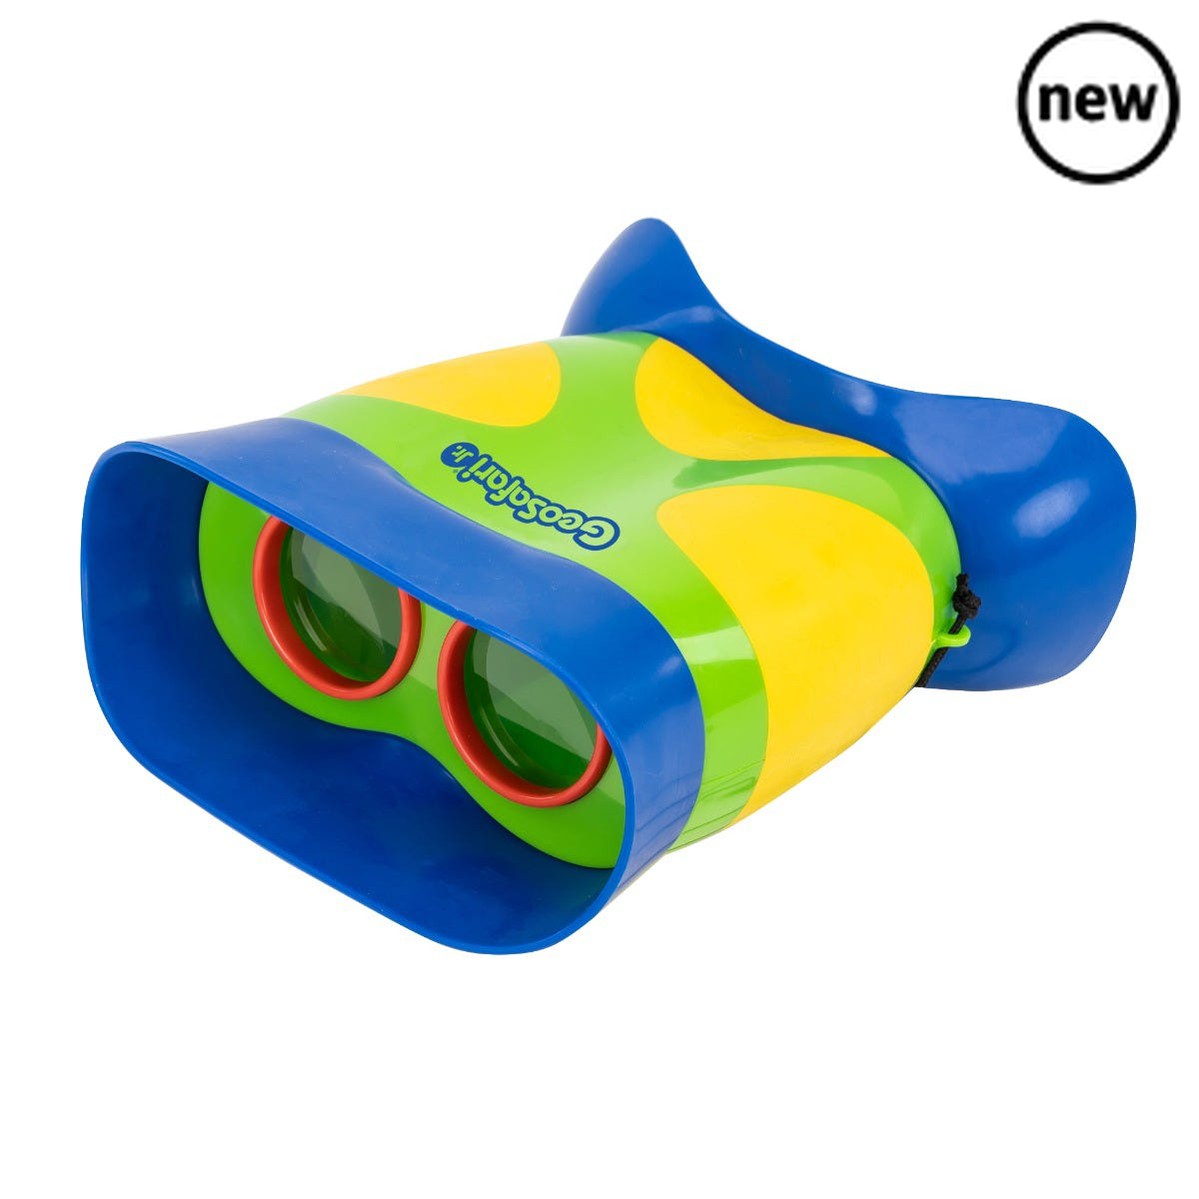 GeoSafari Jr Kidnoculars, Explore the outdoors with the only binoculars designed specifically for little kids. Enlarged, focus-free eyepieces which are more than three times the size of ordinary binoculars, and perfect-fit goggles with placement guide enable young children, even toddlers, to see up close. These colourful binoculars that have been specifically designed for children. Lightweight and durable these eye pieces are perfect for small explorers! GeoSafari Jr Kidnoculars Binoculars feature focus-fre